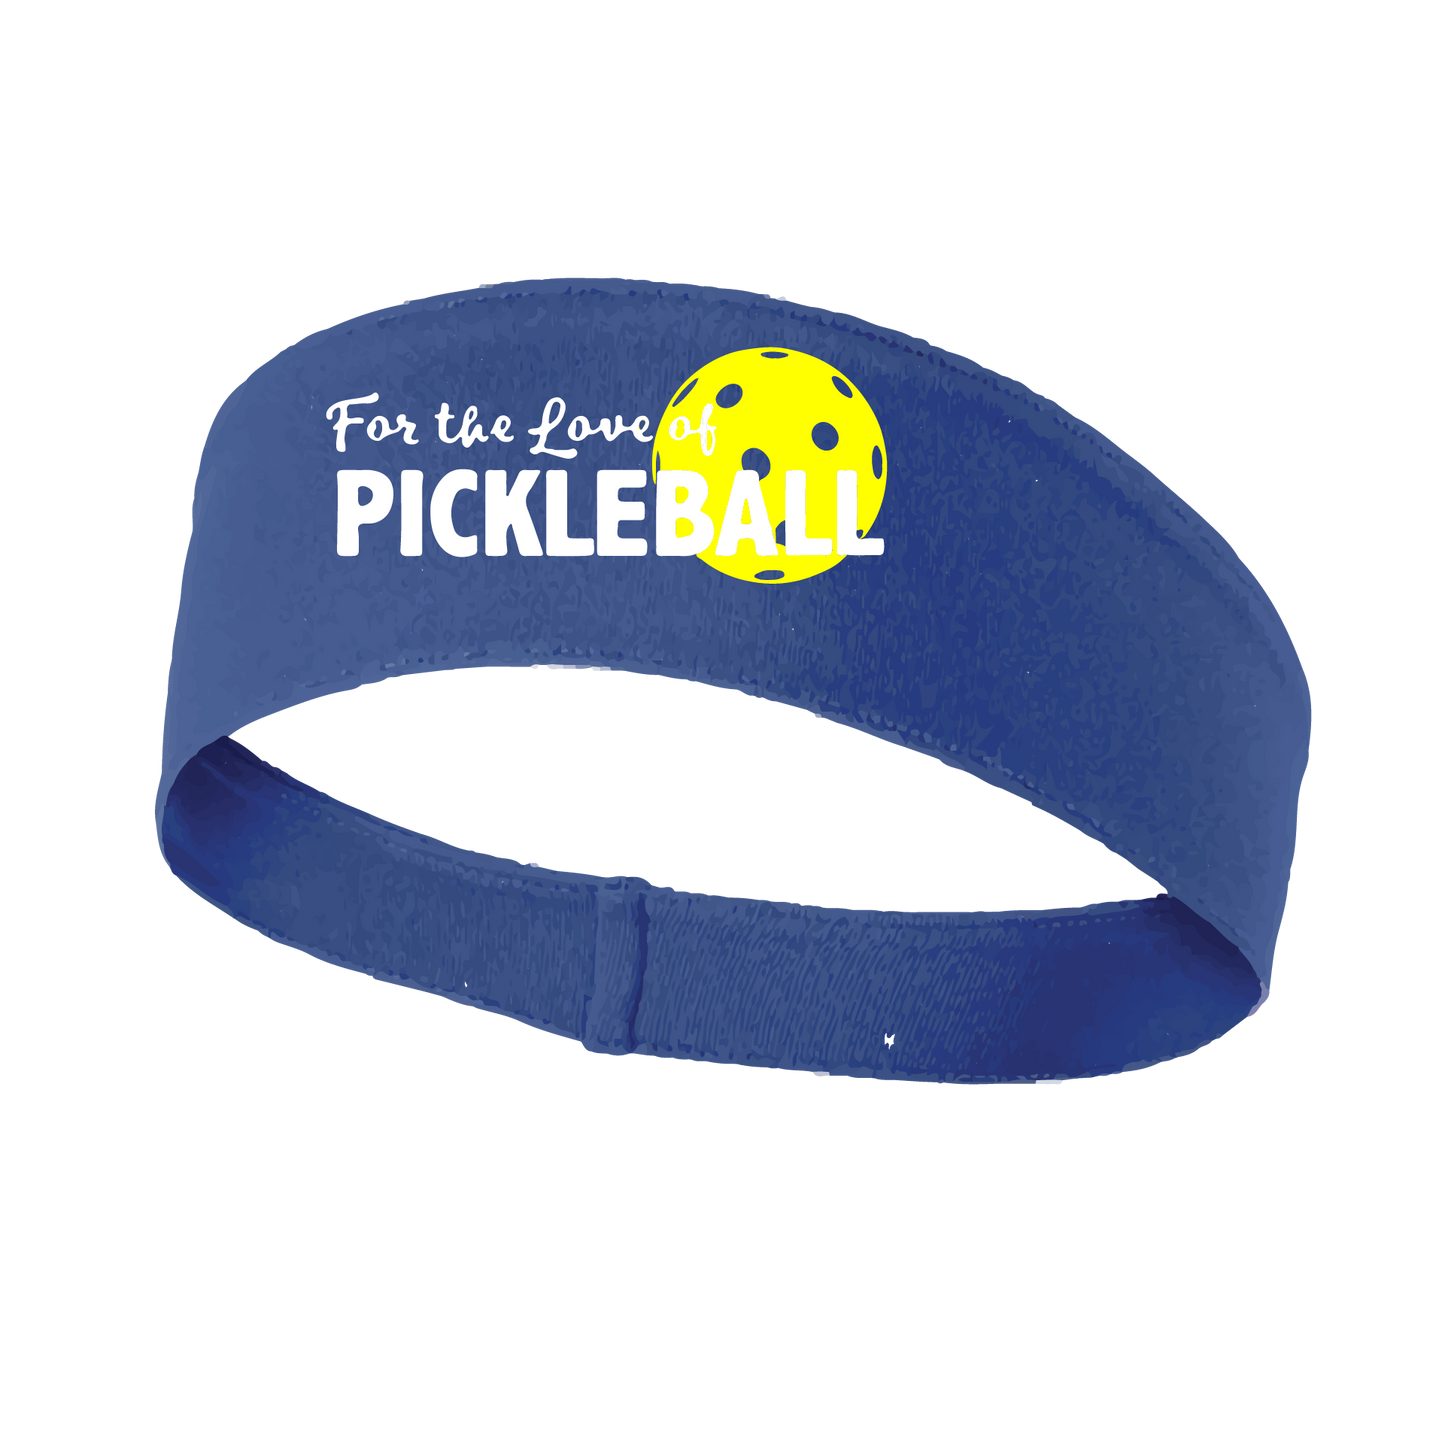 Pickleball Design: For the Love of Pickleball  This fun, pickleball designed, moisture-wicking headband narrows in the back to fit more securely. Single-needle top-stitched edging. These headbands come in a variety of colors. Truly shows your love for the sport of pickleball!!